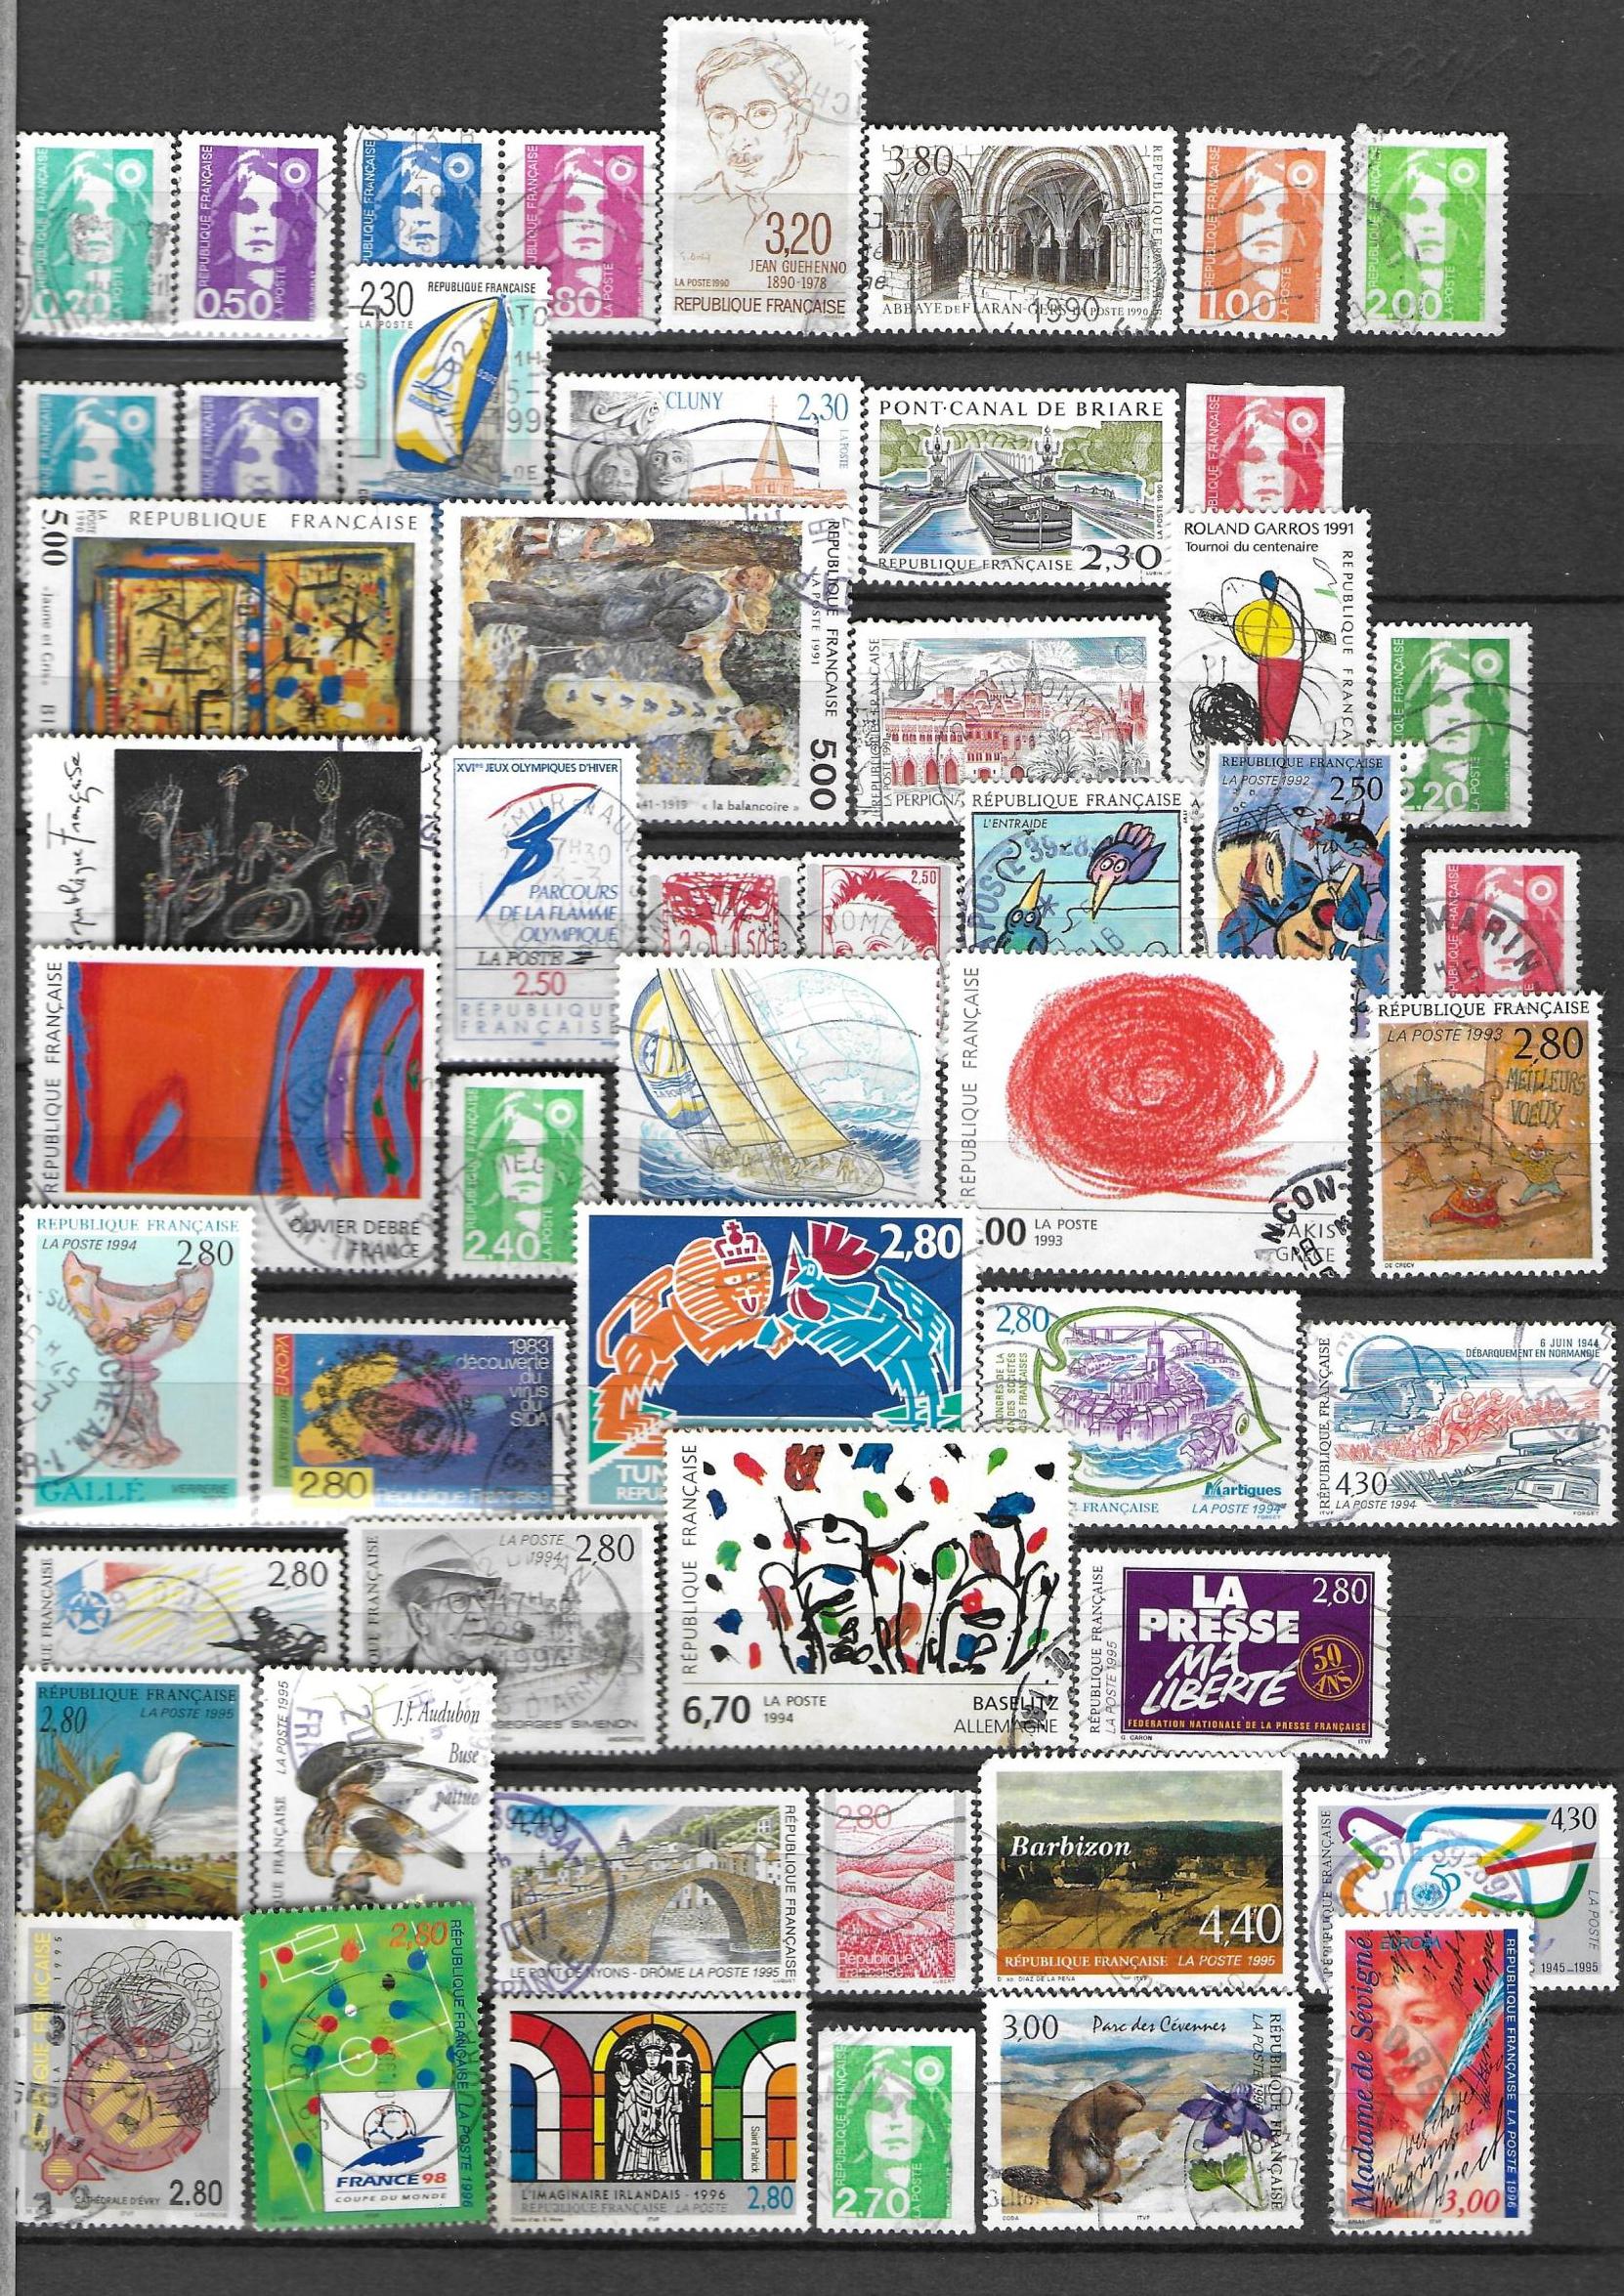 Timbres France 5 - Copie.jpg